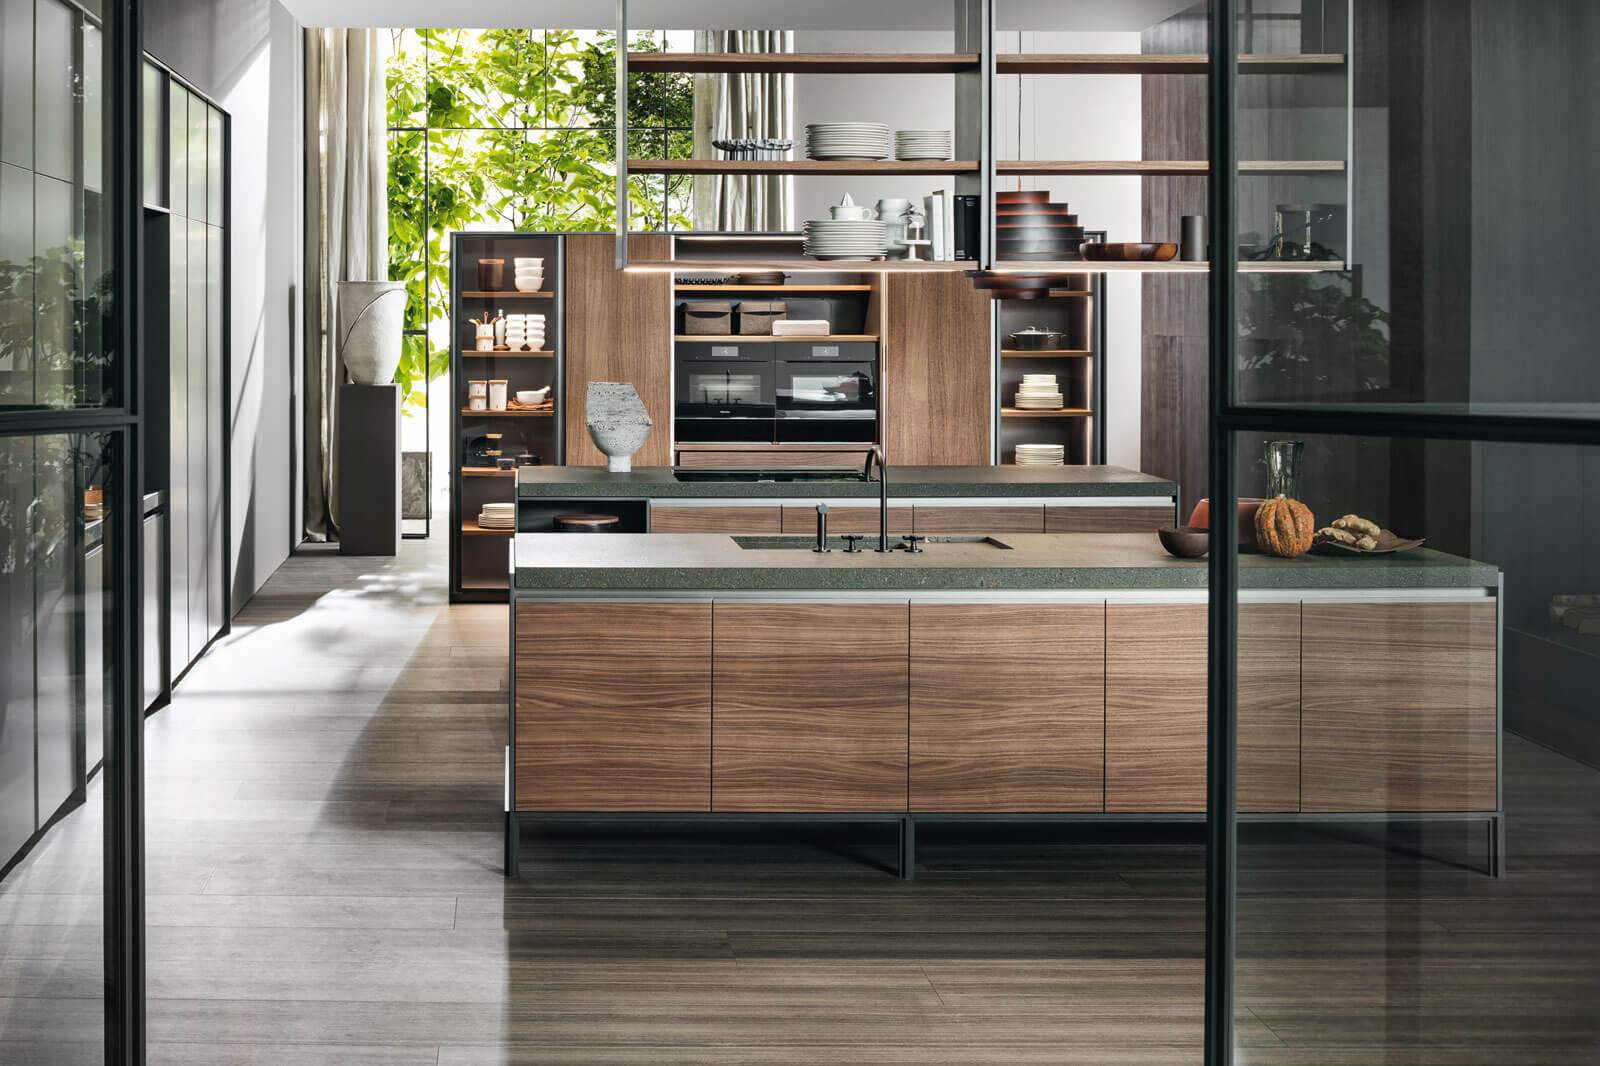 Elements That Make Your Kitchen Look Luxurious